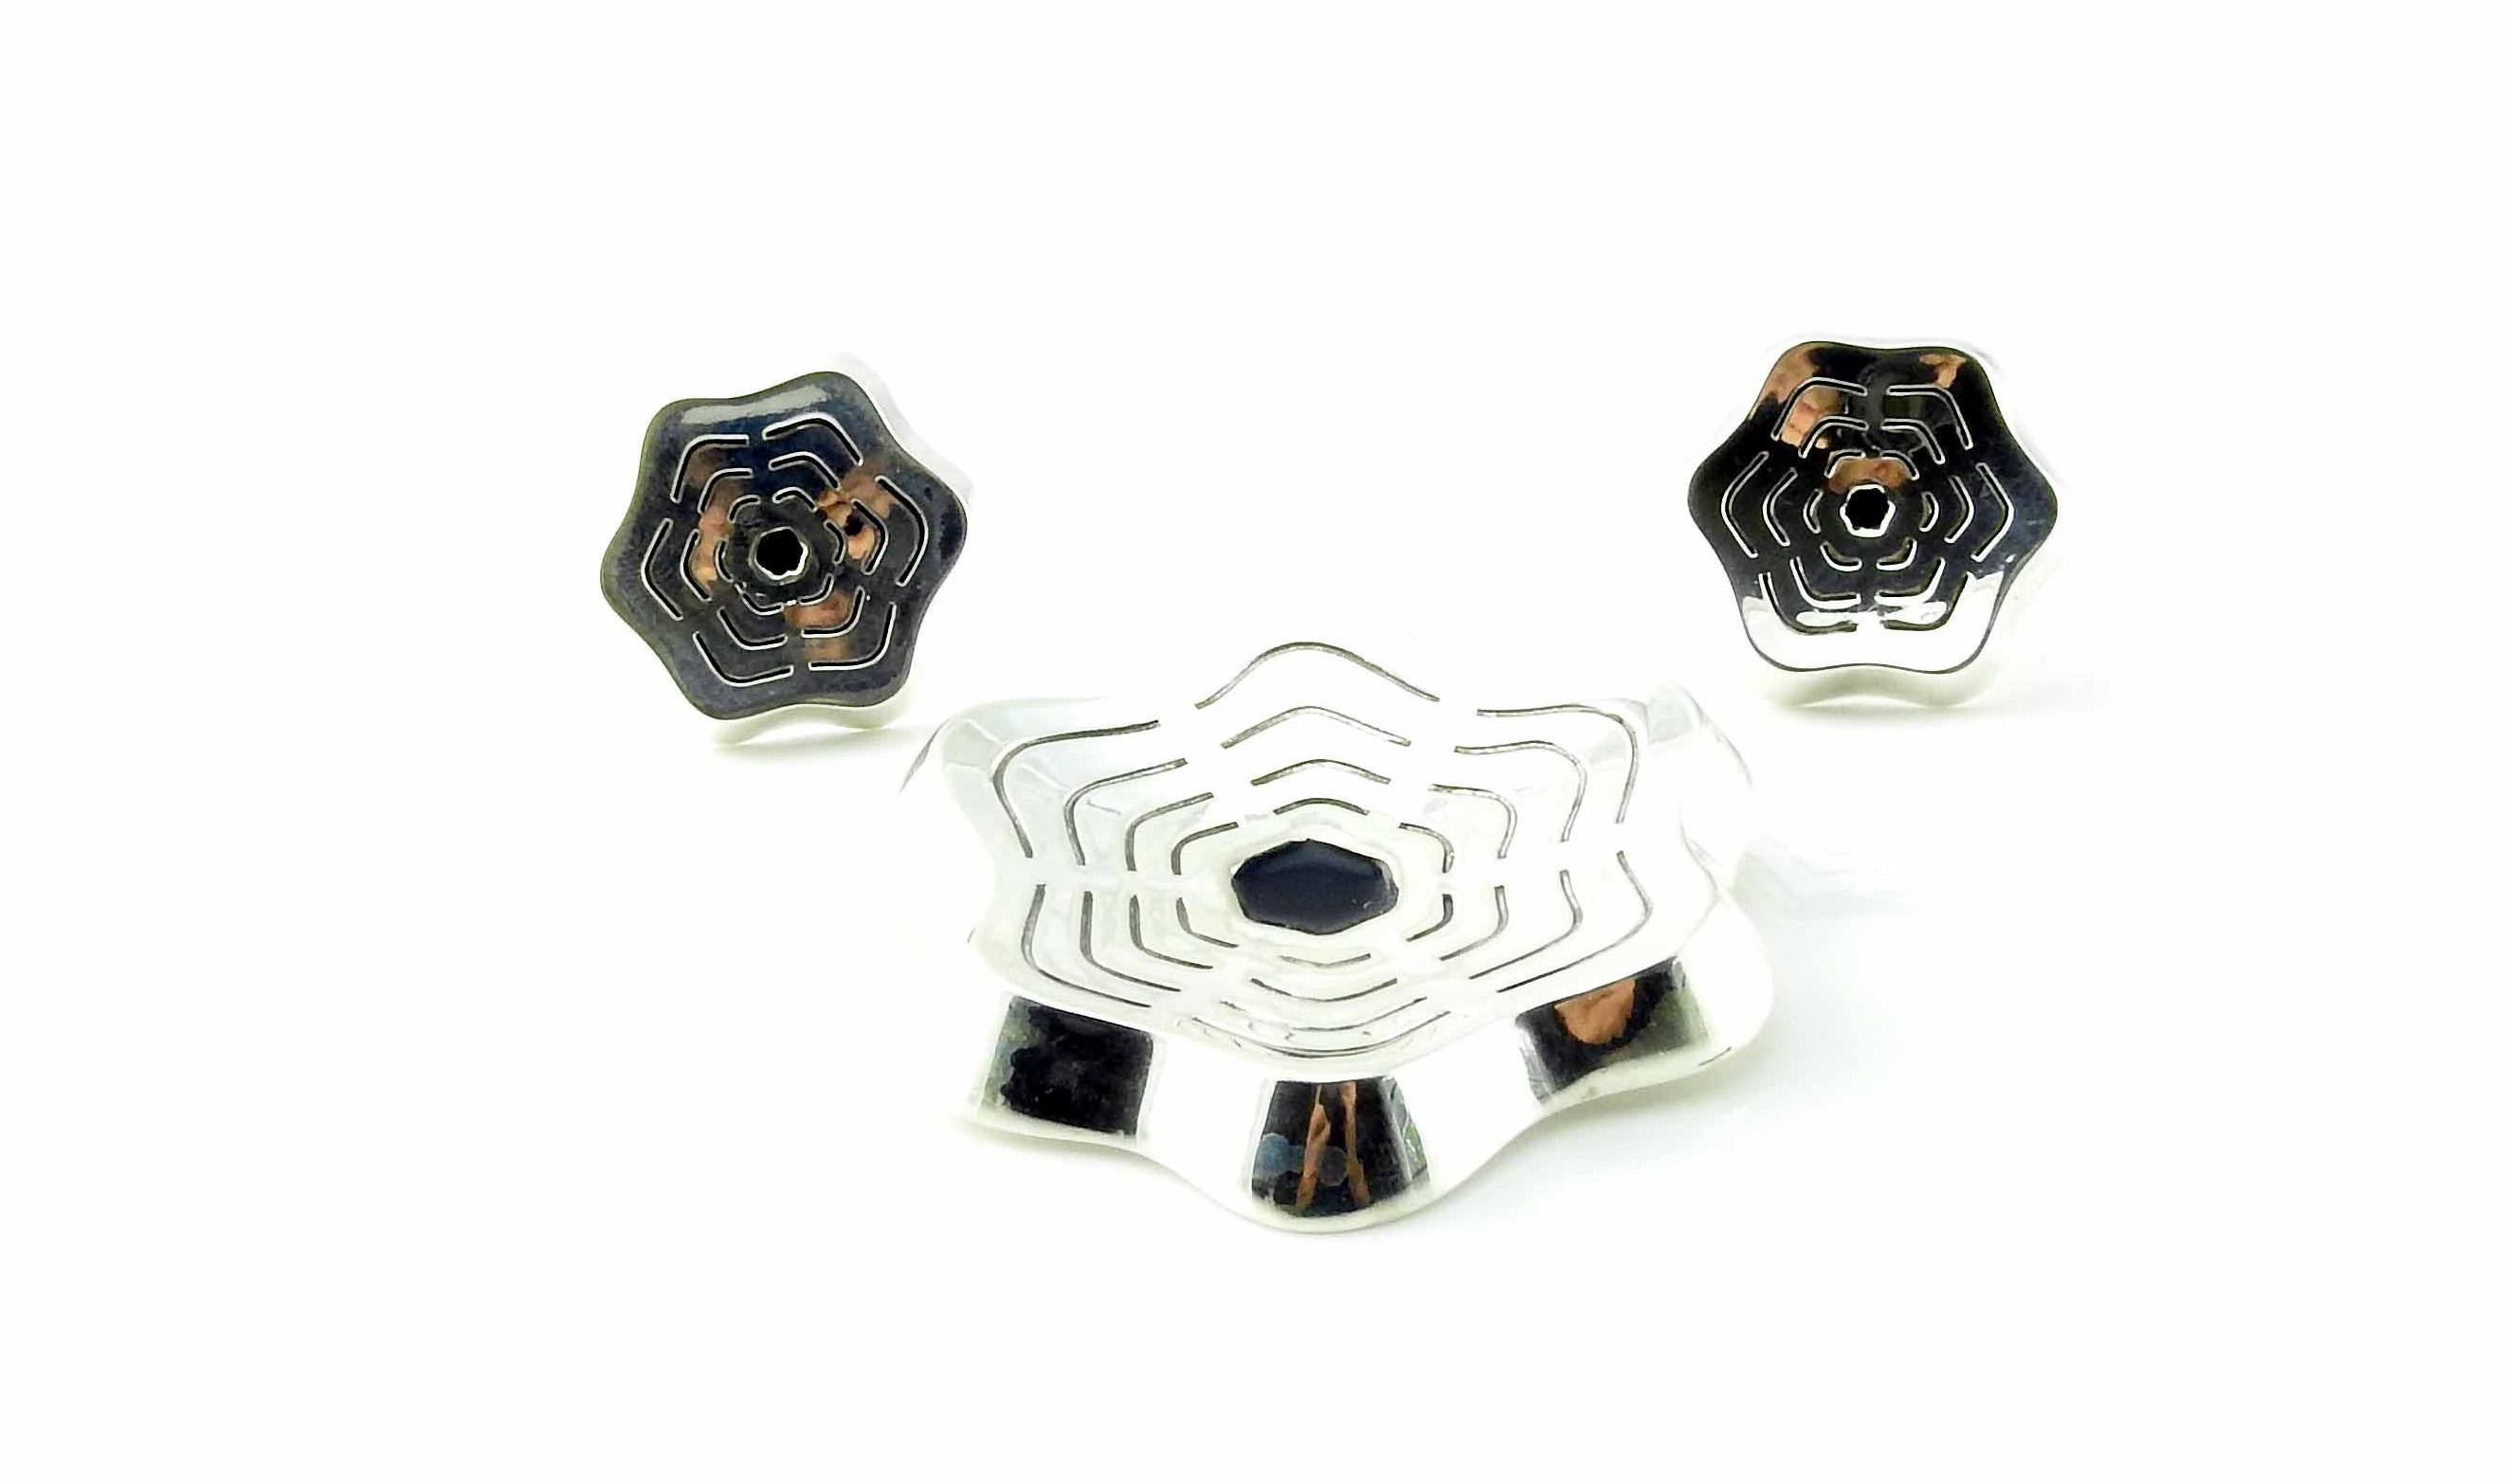 Vintage sterling silver modernist design flower pin and earrings set with black enamel centers, designed by Karen Strand for A. Dragsted of Denmark. The clips on the earrings are 14K yellow gold.

Karen Strand was a Danish jewelry designer known for